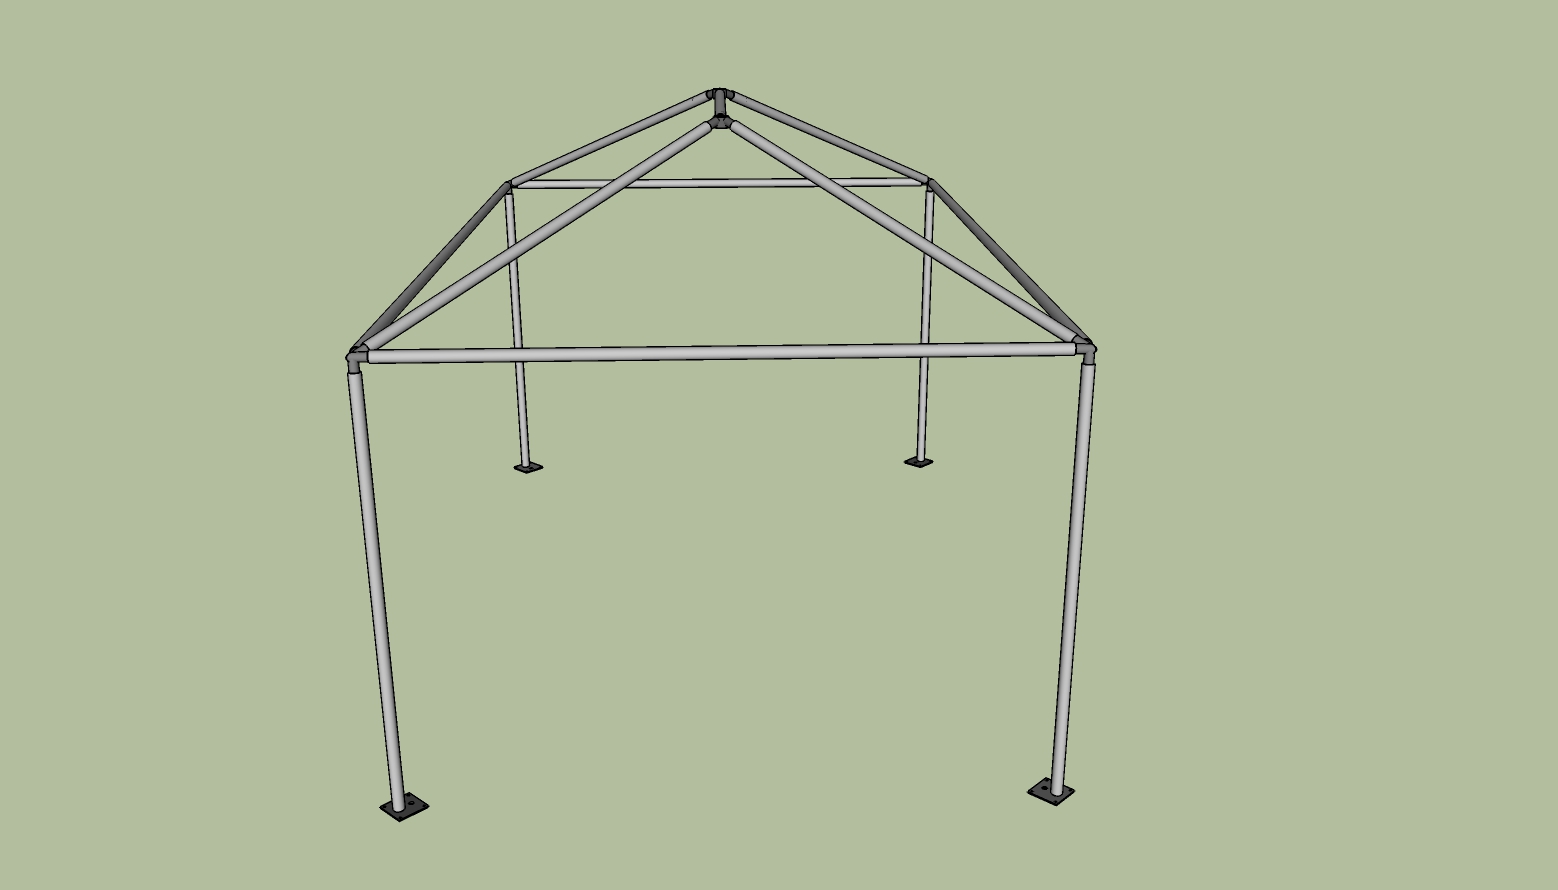 10x15 frame tent side view